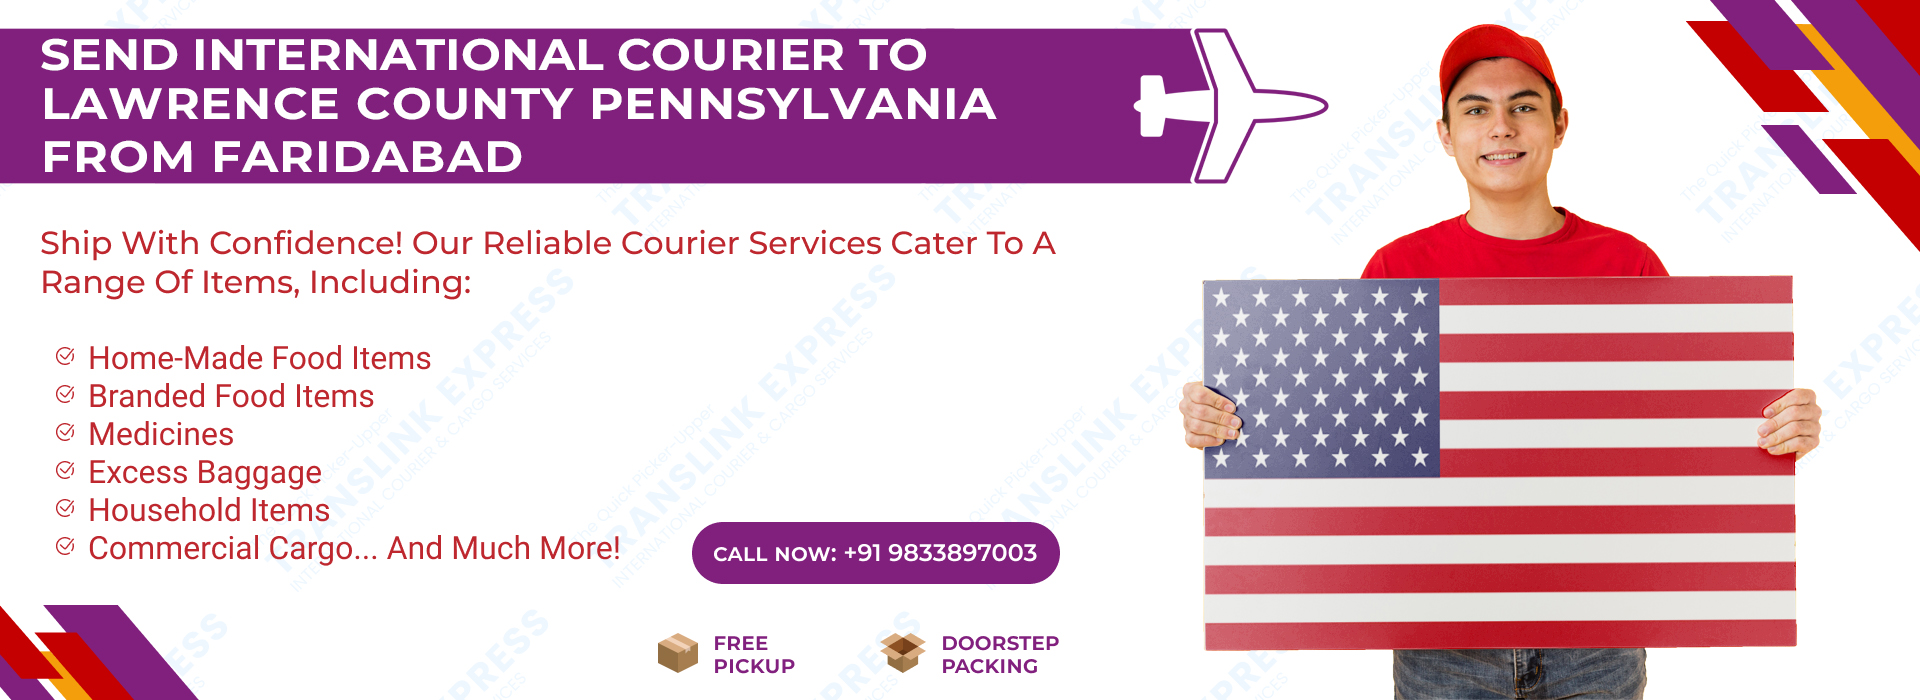 Courier to Lawrence County Pennsylvania From Faridabad